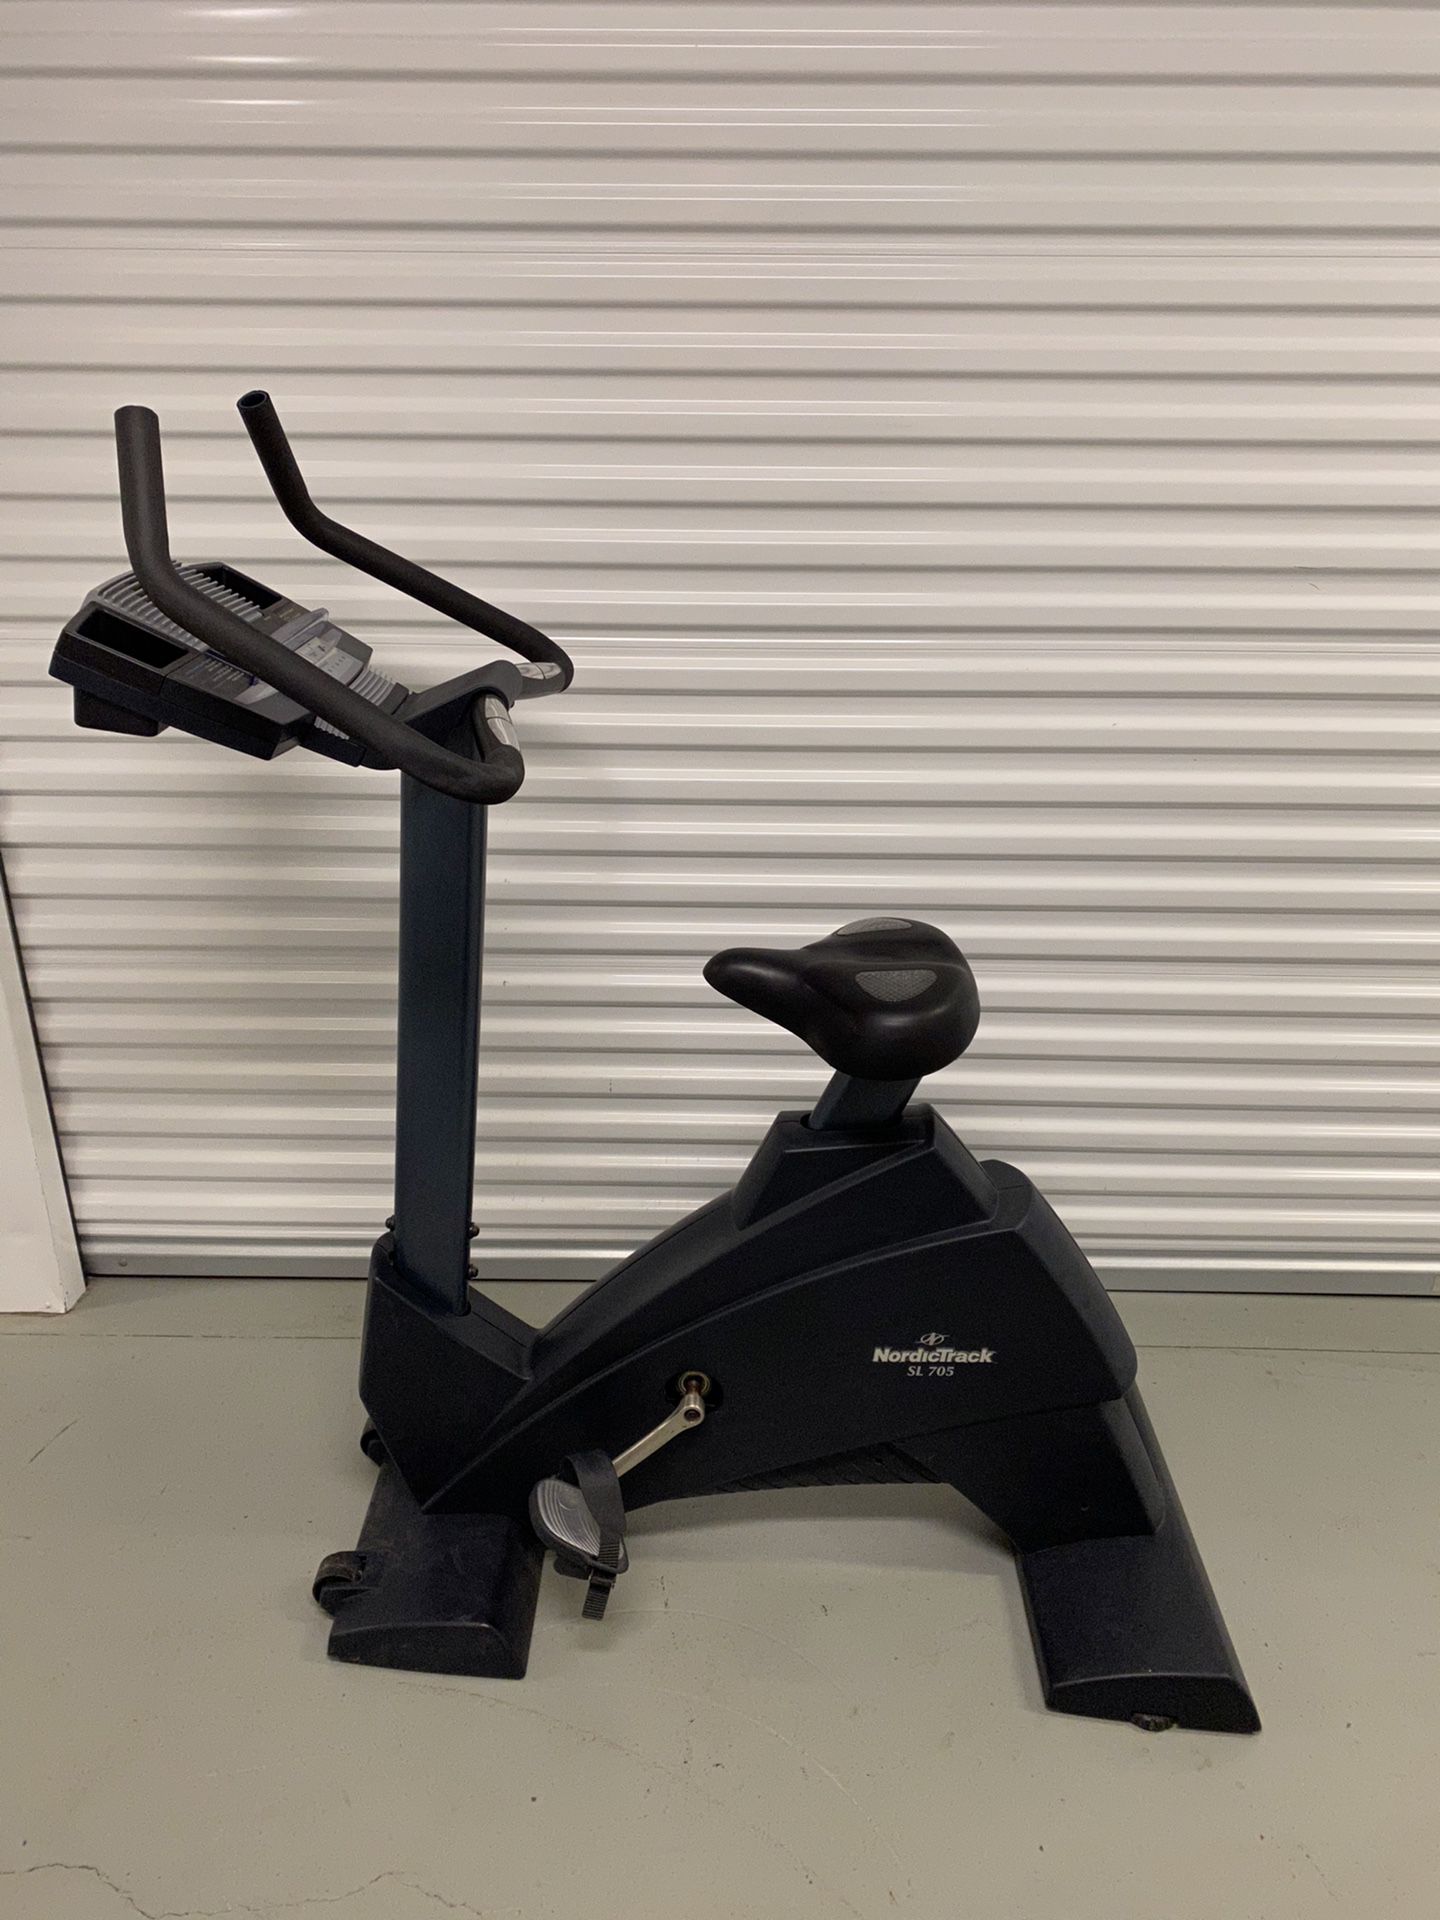 NordicTrack SL705 Upright Exercise Cycle Bike